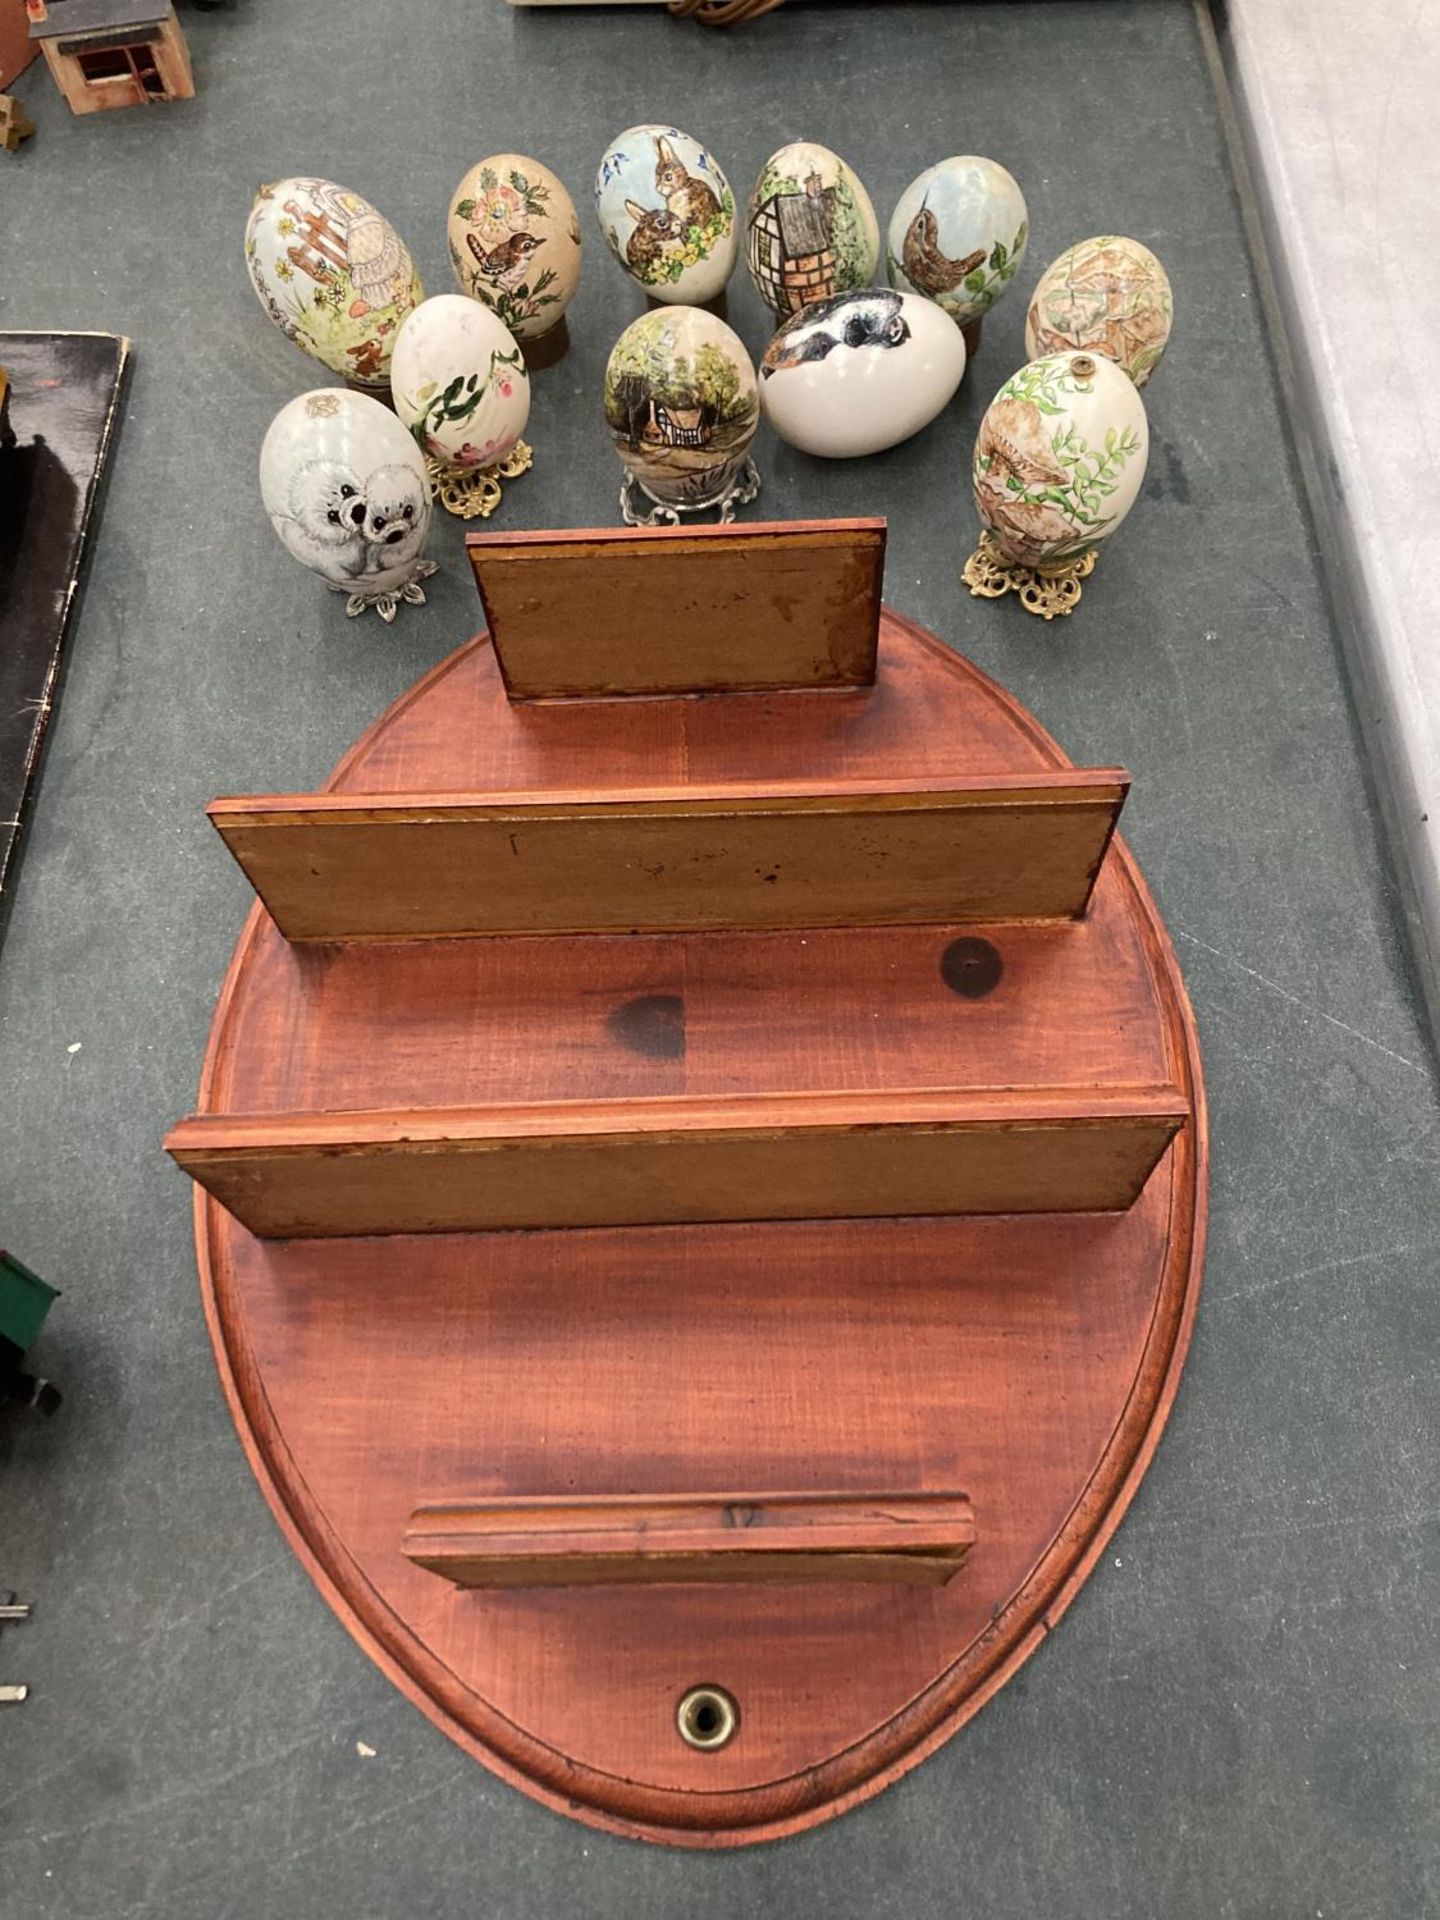 A WOODEN DISPLAY SHELF WITH A QUANTITY OF PAINTED EGGS